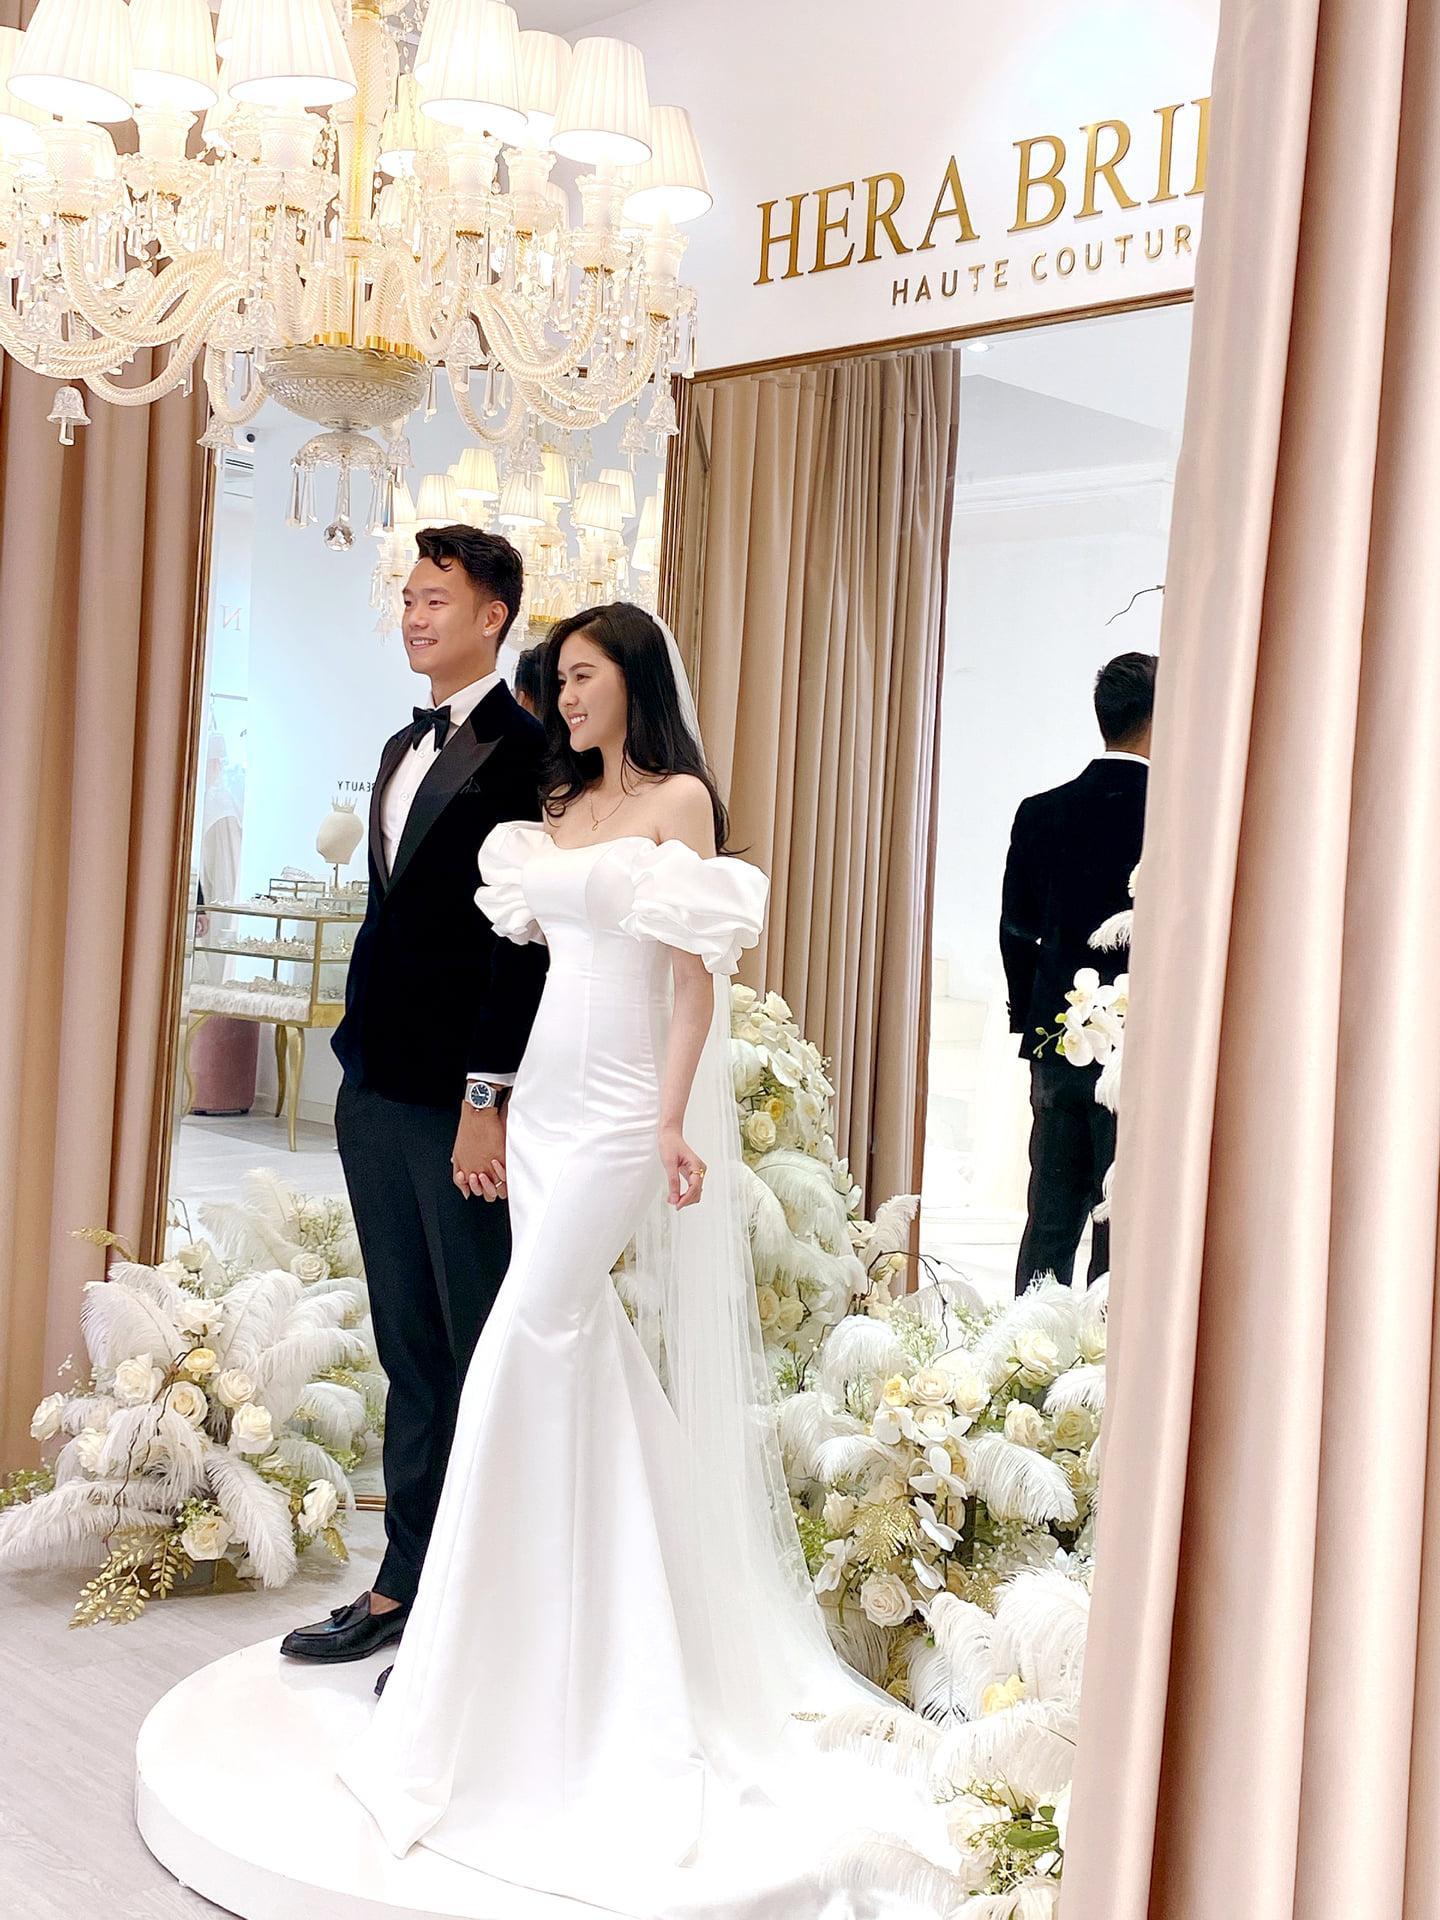 Vietnam's central defender held an engagement ceremony with his hot girl girlfriend